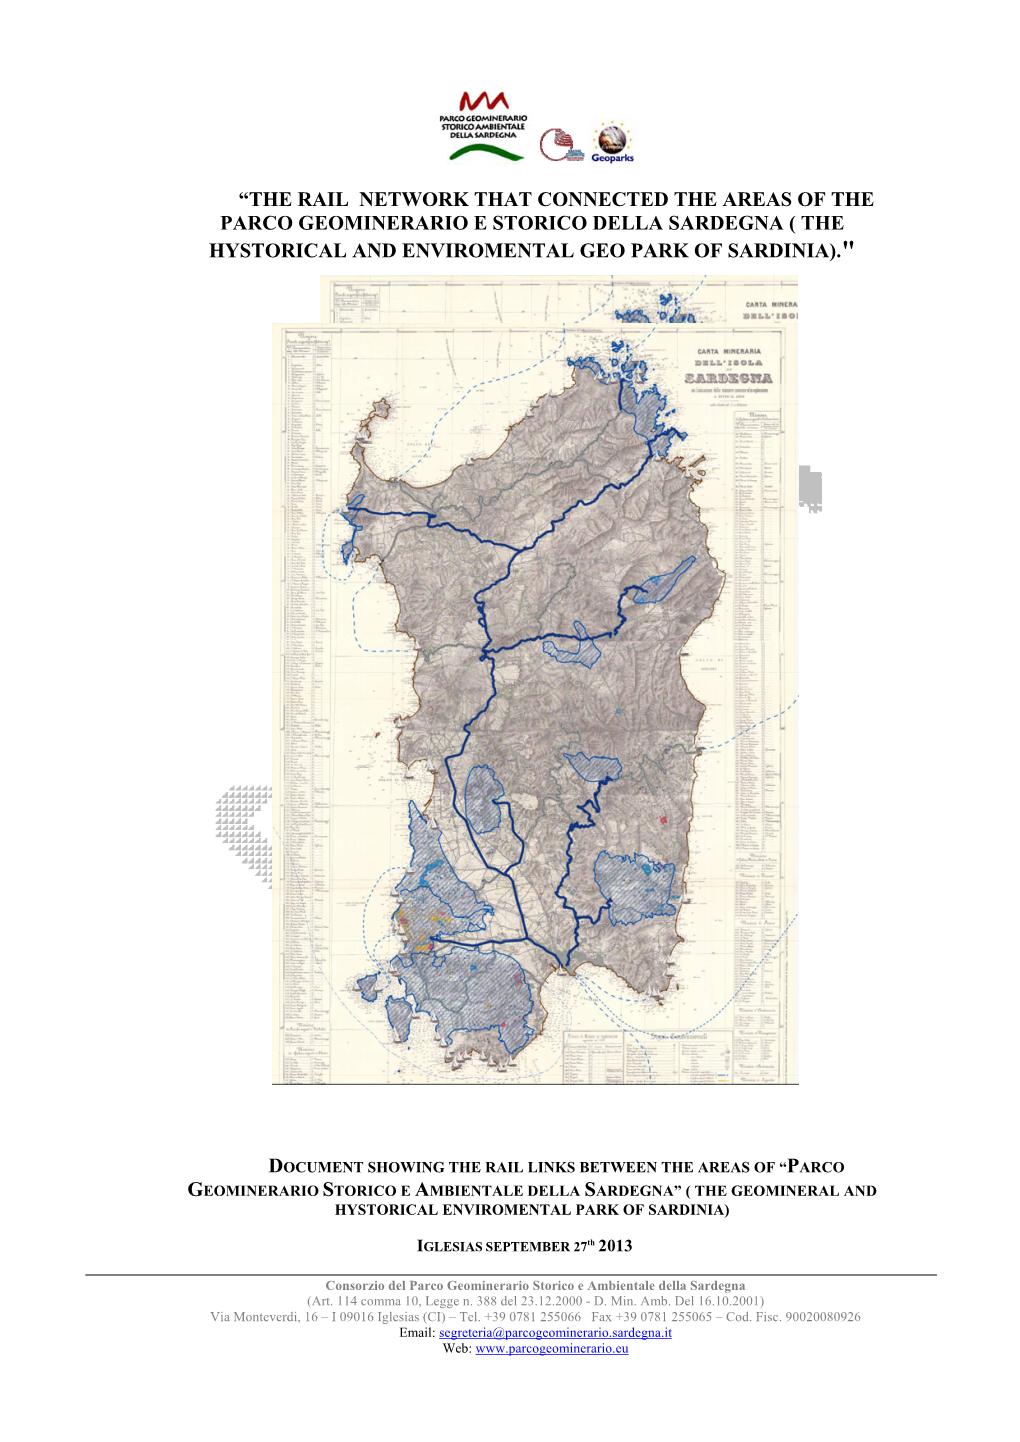 “The Rail Network That Connected the Areas of the Parco Geominerario E Storico Della Sardegna ( the Hystorical and Enviromental Geo Park of Sardinia)."